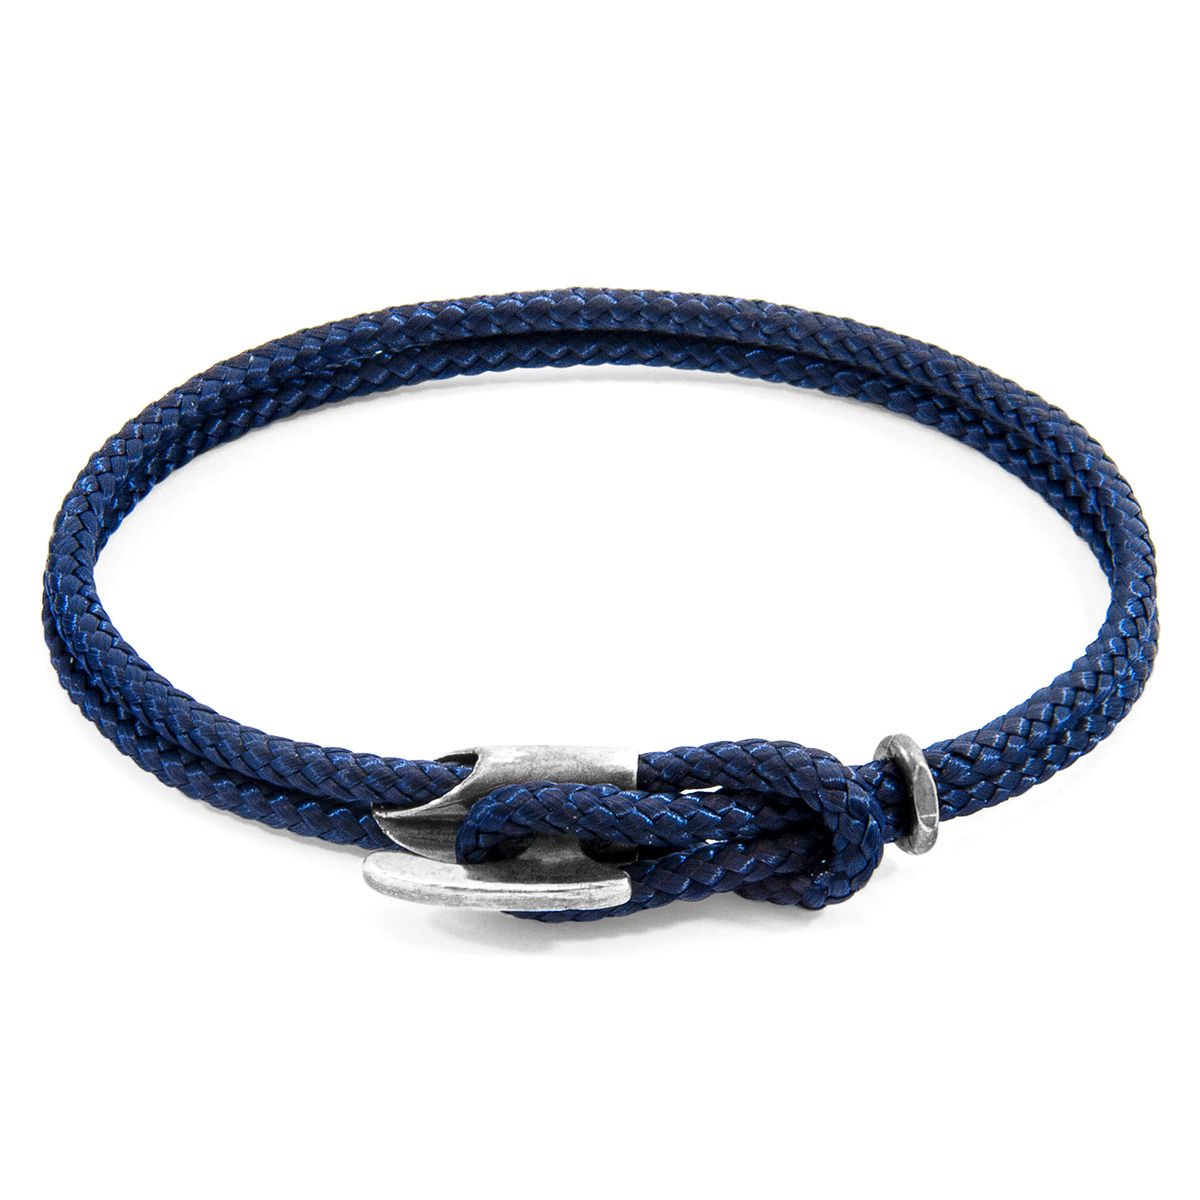 The Navy Blue Padstow Silver and Rope Bracelet was both designed and skilfully handcrafted completely in Great Britain, In Quality We Trust. For the Modern Journeyman (and woman), ANCHOR & CREW takes ownership of an exploratory lifestyle and enjoys the Happy-Good Life. Combining British craft manufacturing with a discerning modern-minimalist style, this ANCHOR & CREW bracelet features:

3mm diameter performance Marine Grade polyester and nylon rope (GB) 
Secure solid .925 sterling silver bar-hook cleat (GB)

SIZING
This bracelet is available in four bracelet lengths, 17cm, 19cm, 21cm or 23cm in circumference. To take the bracelet on or off your wrist, simply (un)clutch the rope loop from the bar-hook cleat. As pictured, the bracelet is most secure when the rope loop is fed through the smaller loop that emerges beyond the clasp.